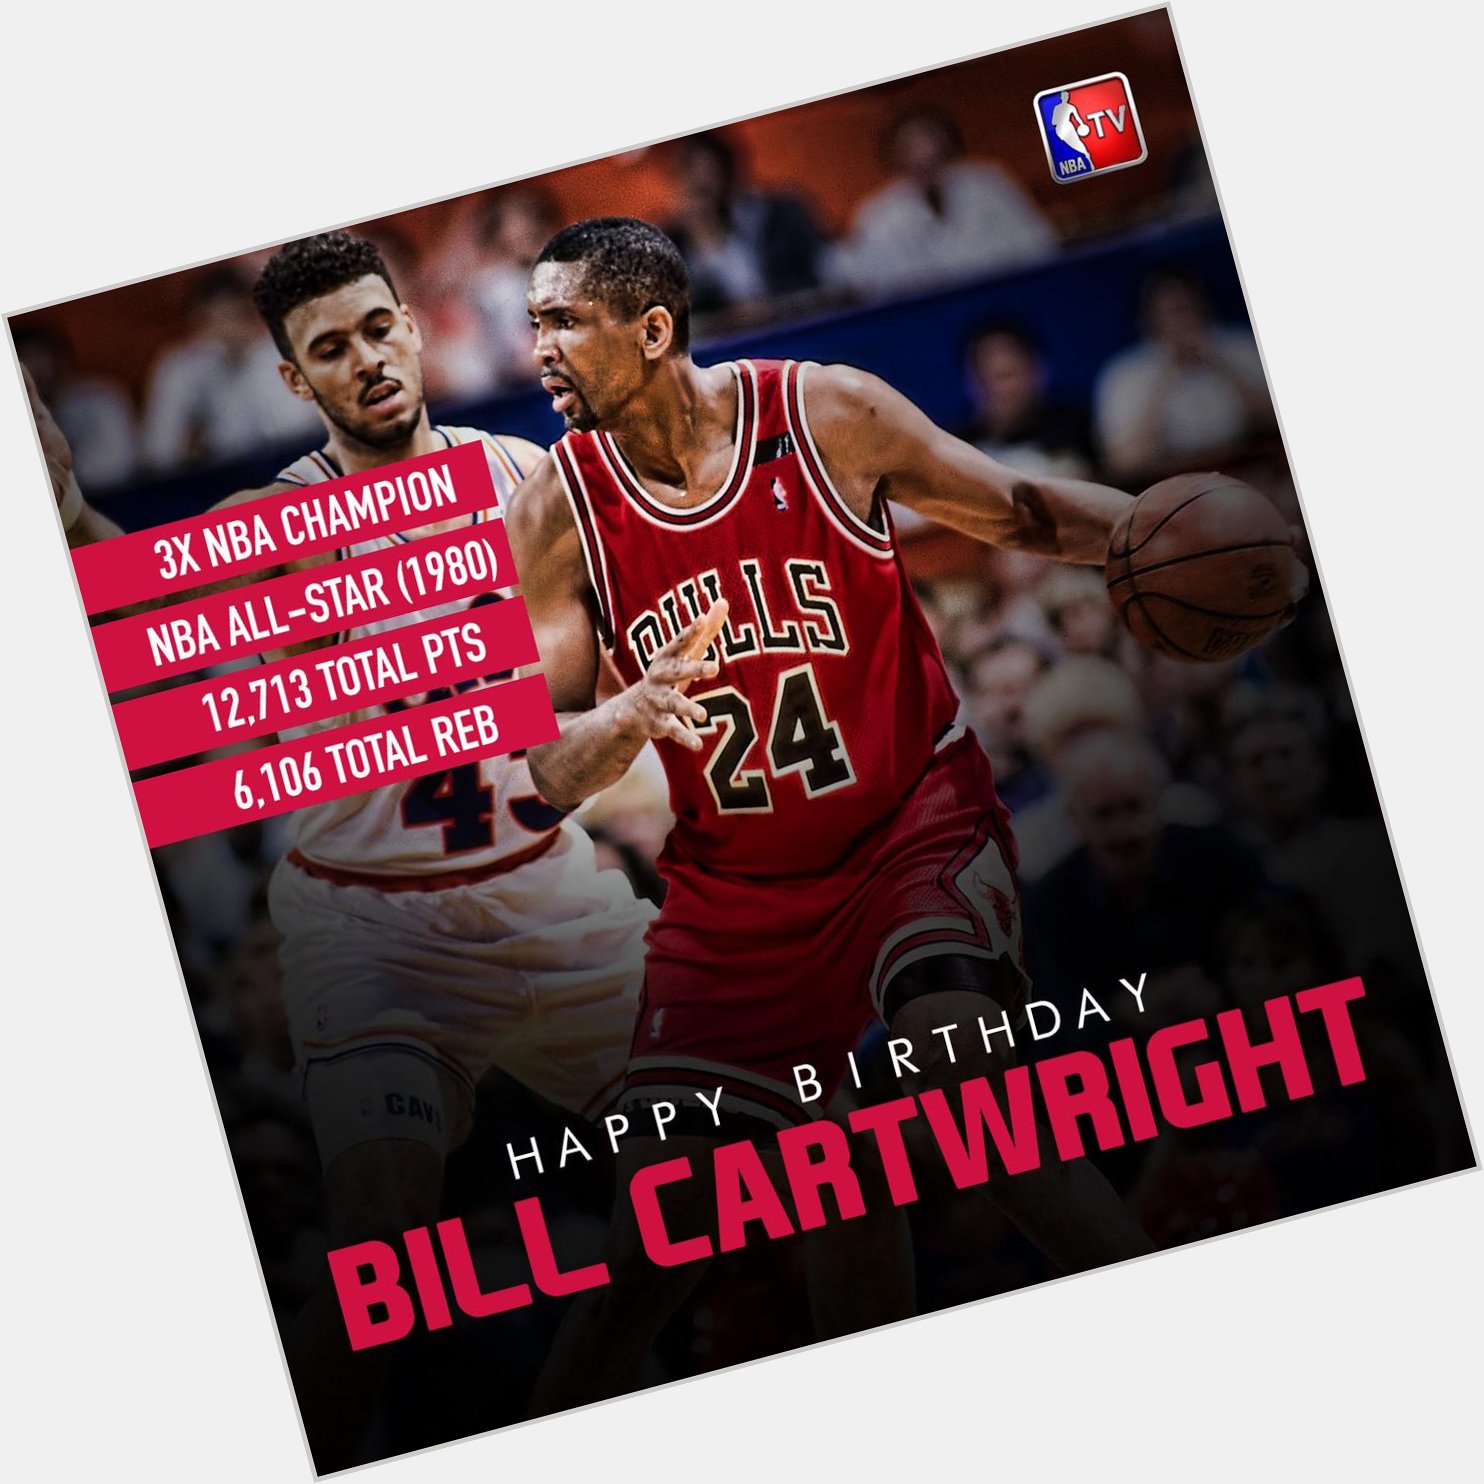 Join us in wishing Bill Cartwright a Happy Birthday! 